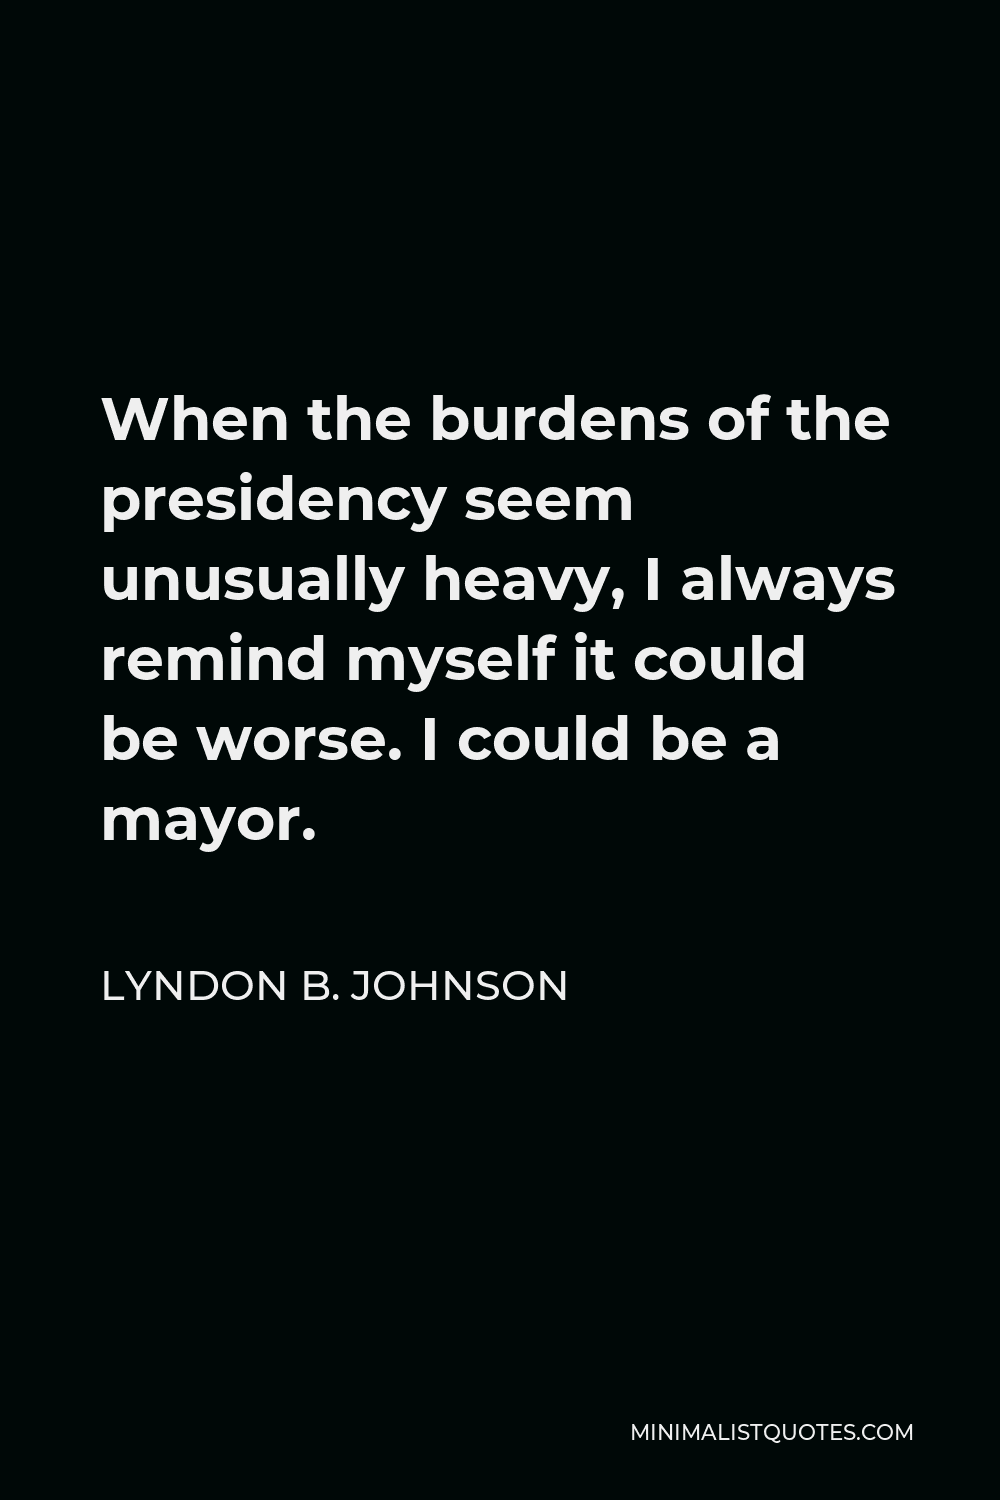 Lyndon B. Johnson Quote - When the burdens of the presidency seem unusually heavy, I always remind myself it could be worse. I could be a mayor.